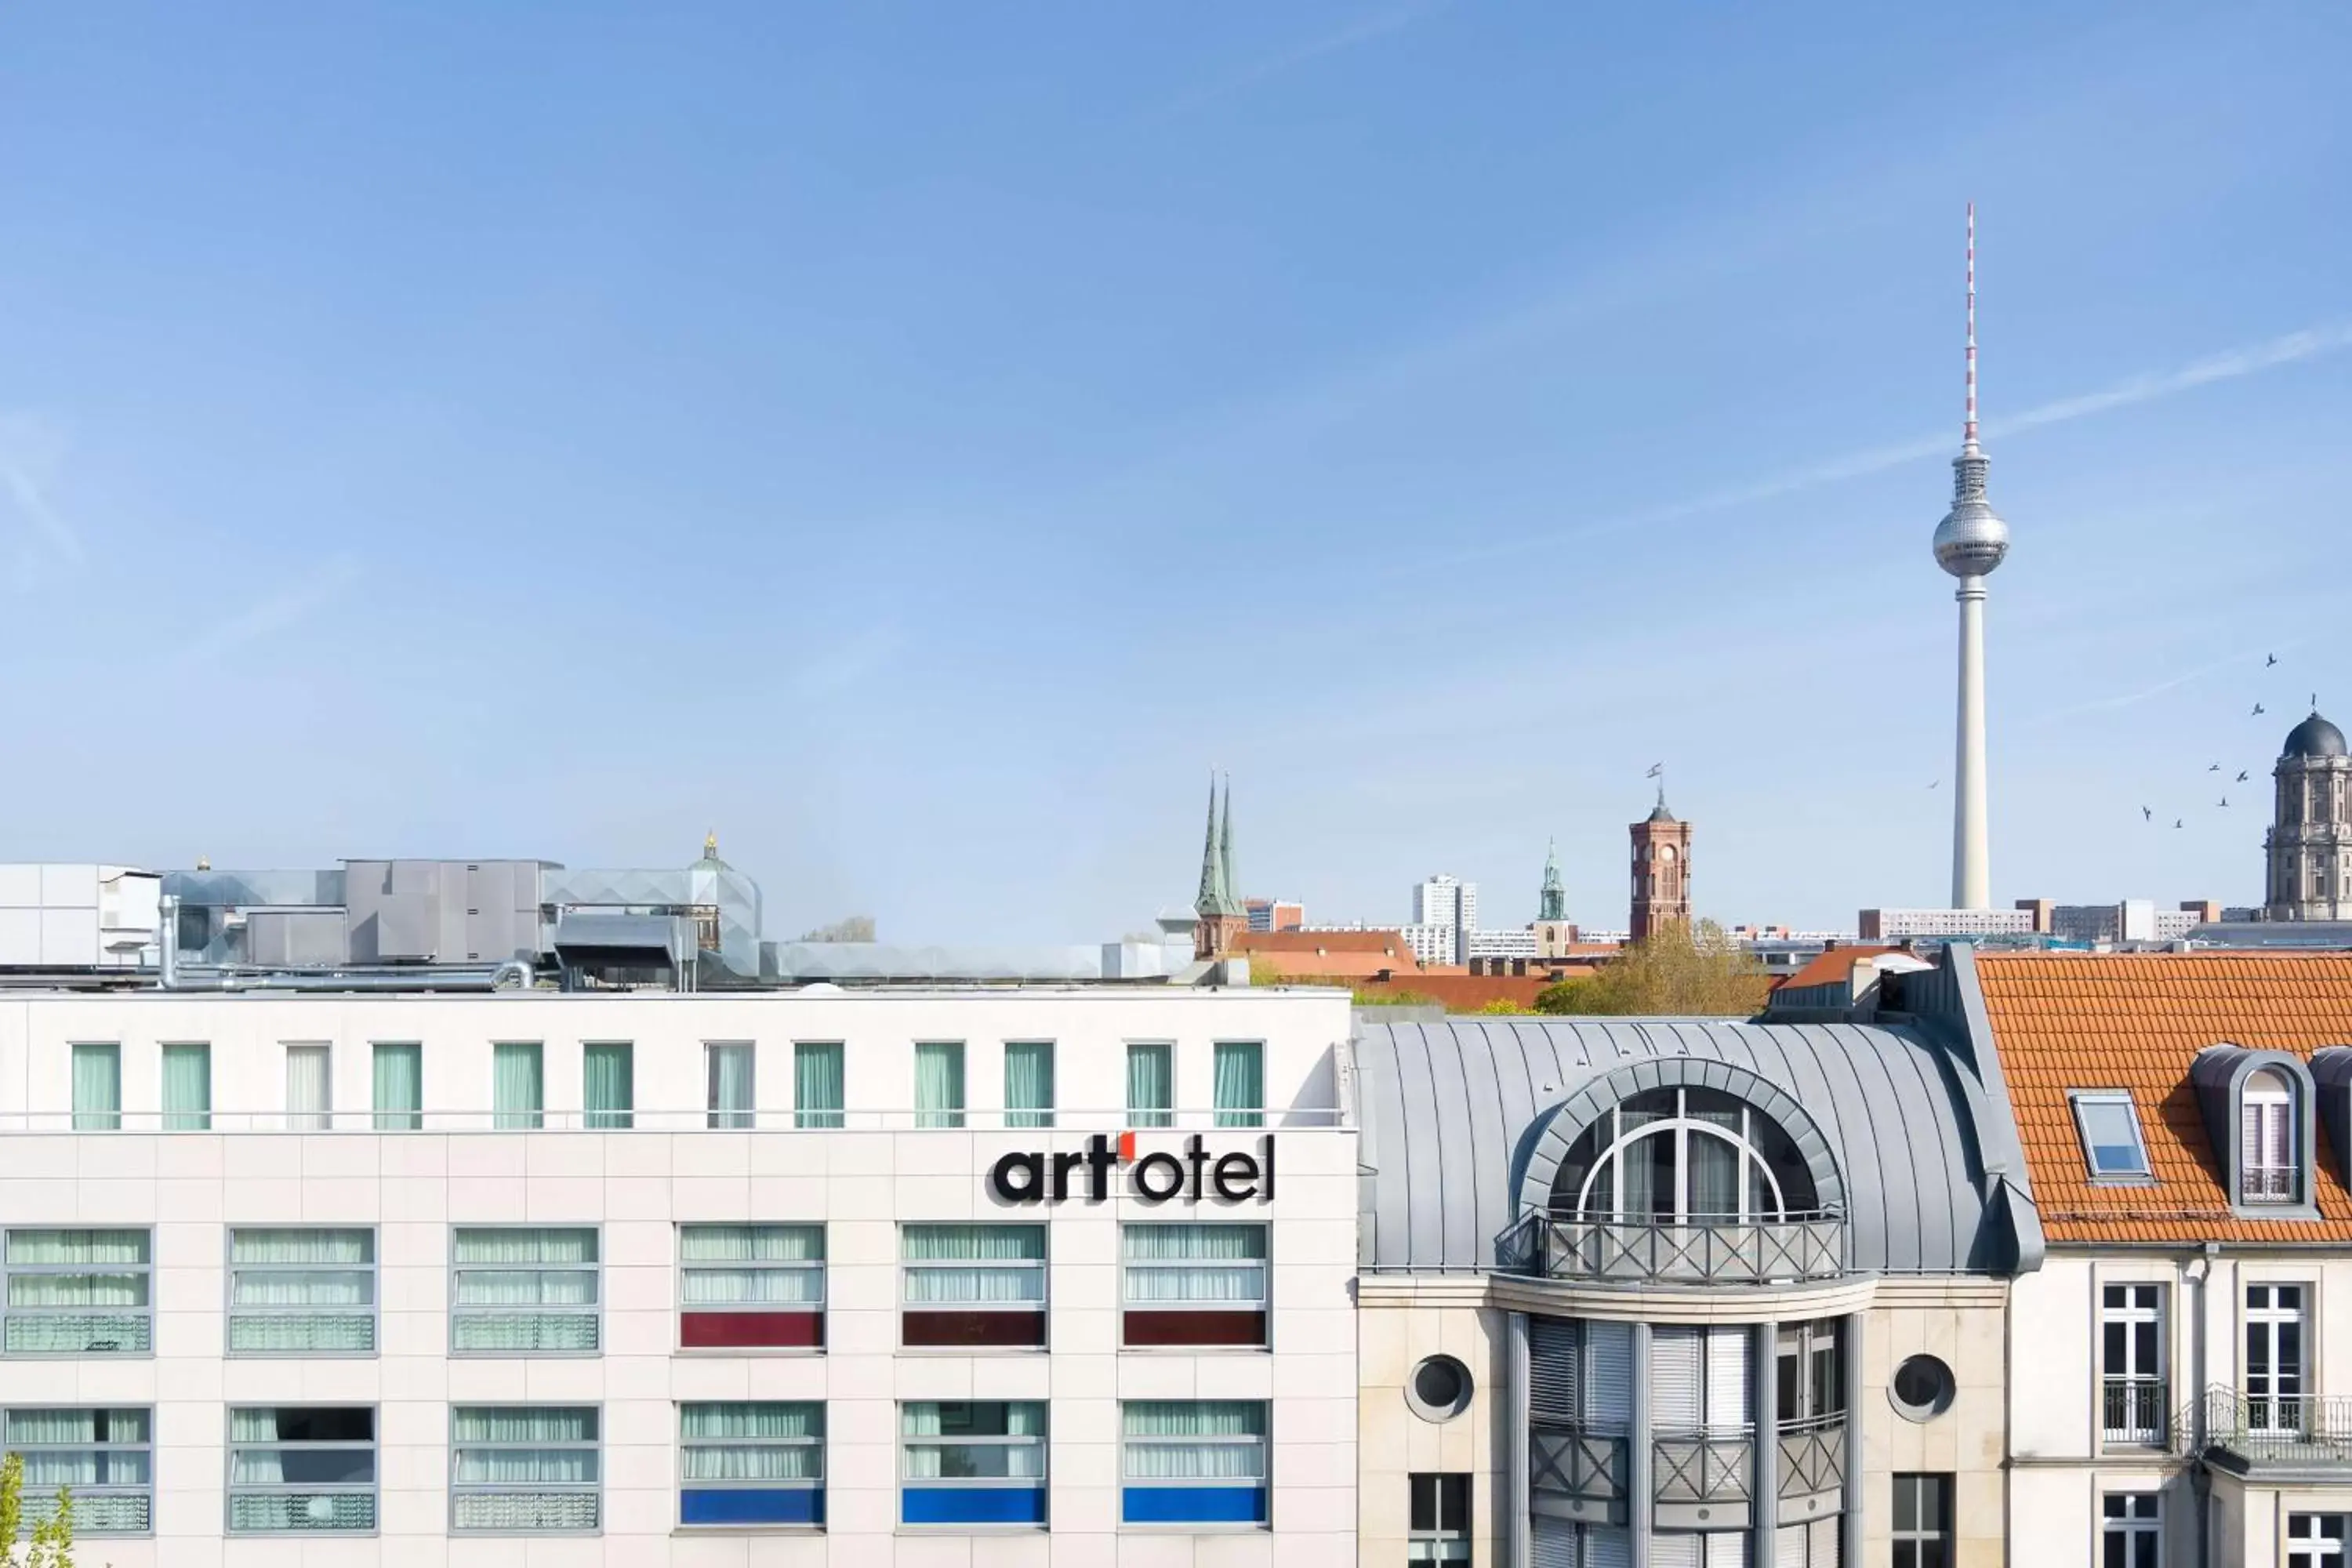 Property building in art'otel berlin mitte, Powered by Radisson Hotels